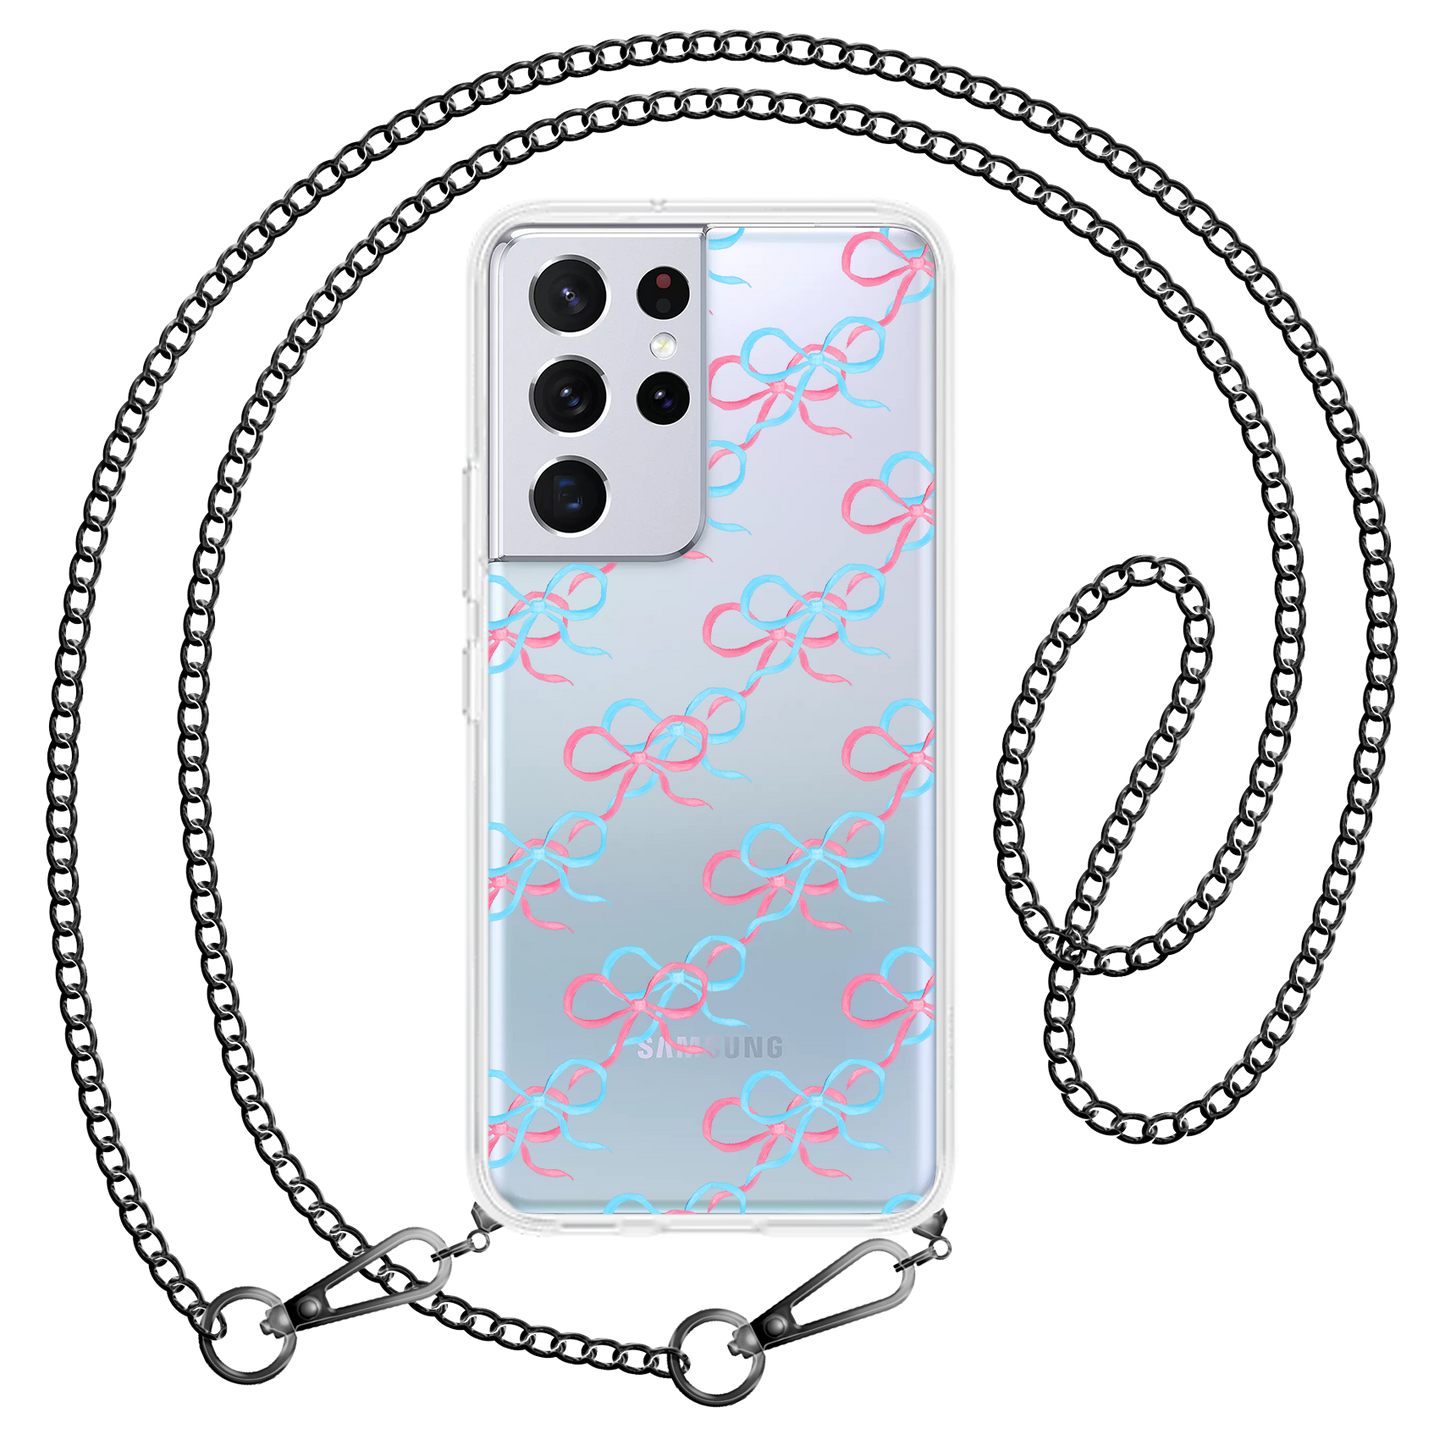 Android Rearguard Hybrid Case - Coquette Pink & Blue Bow